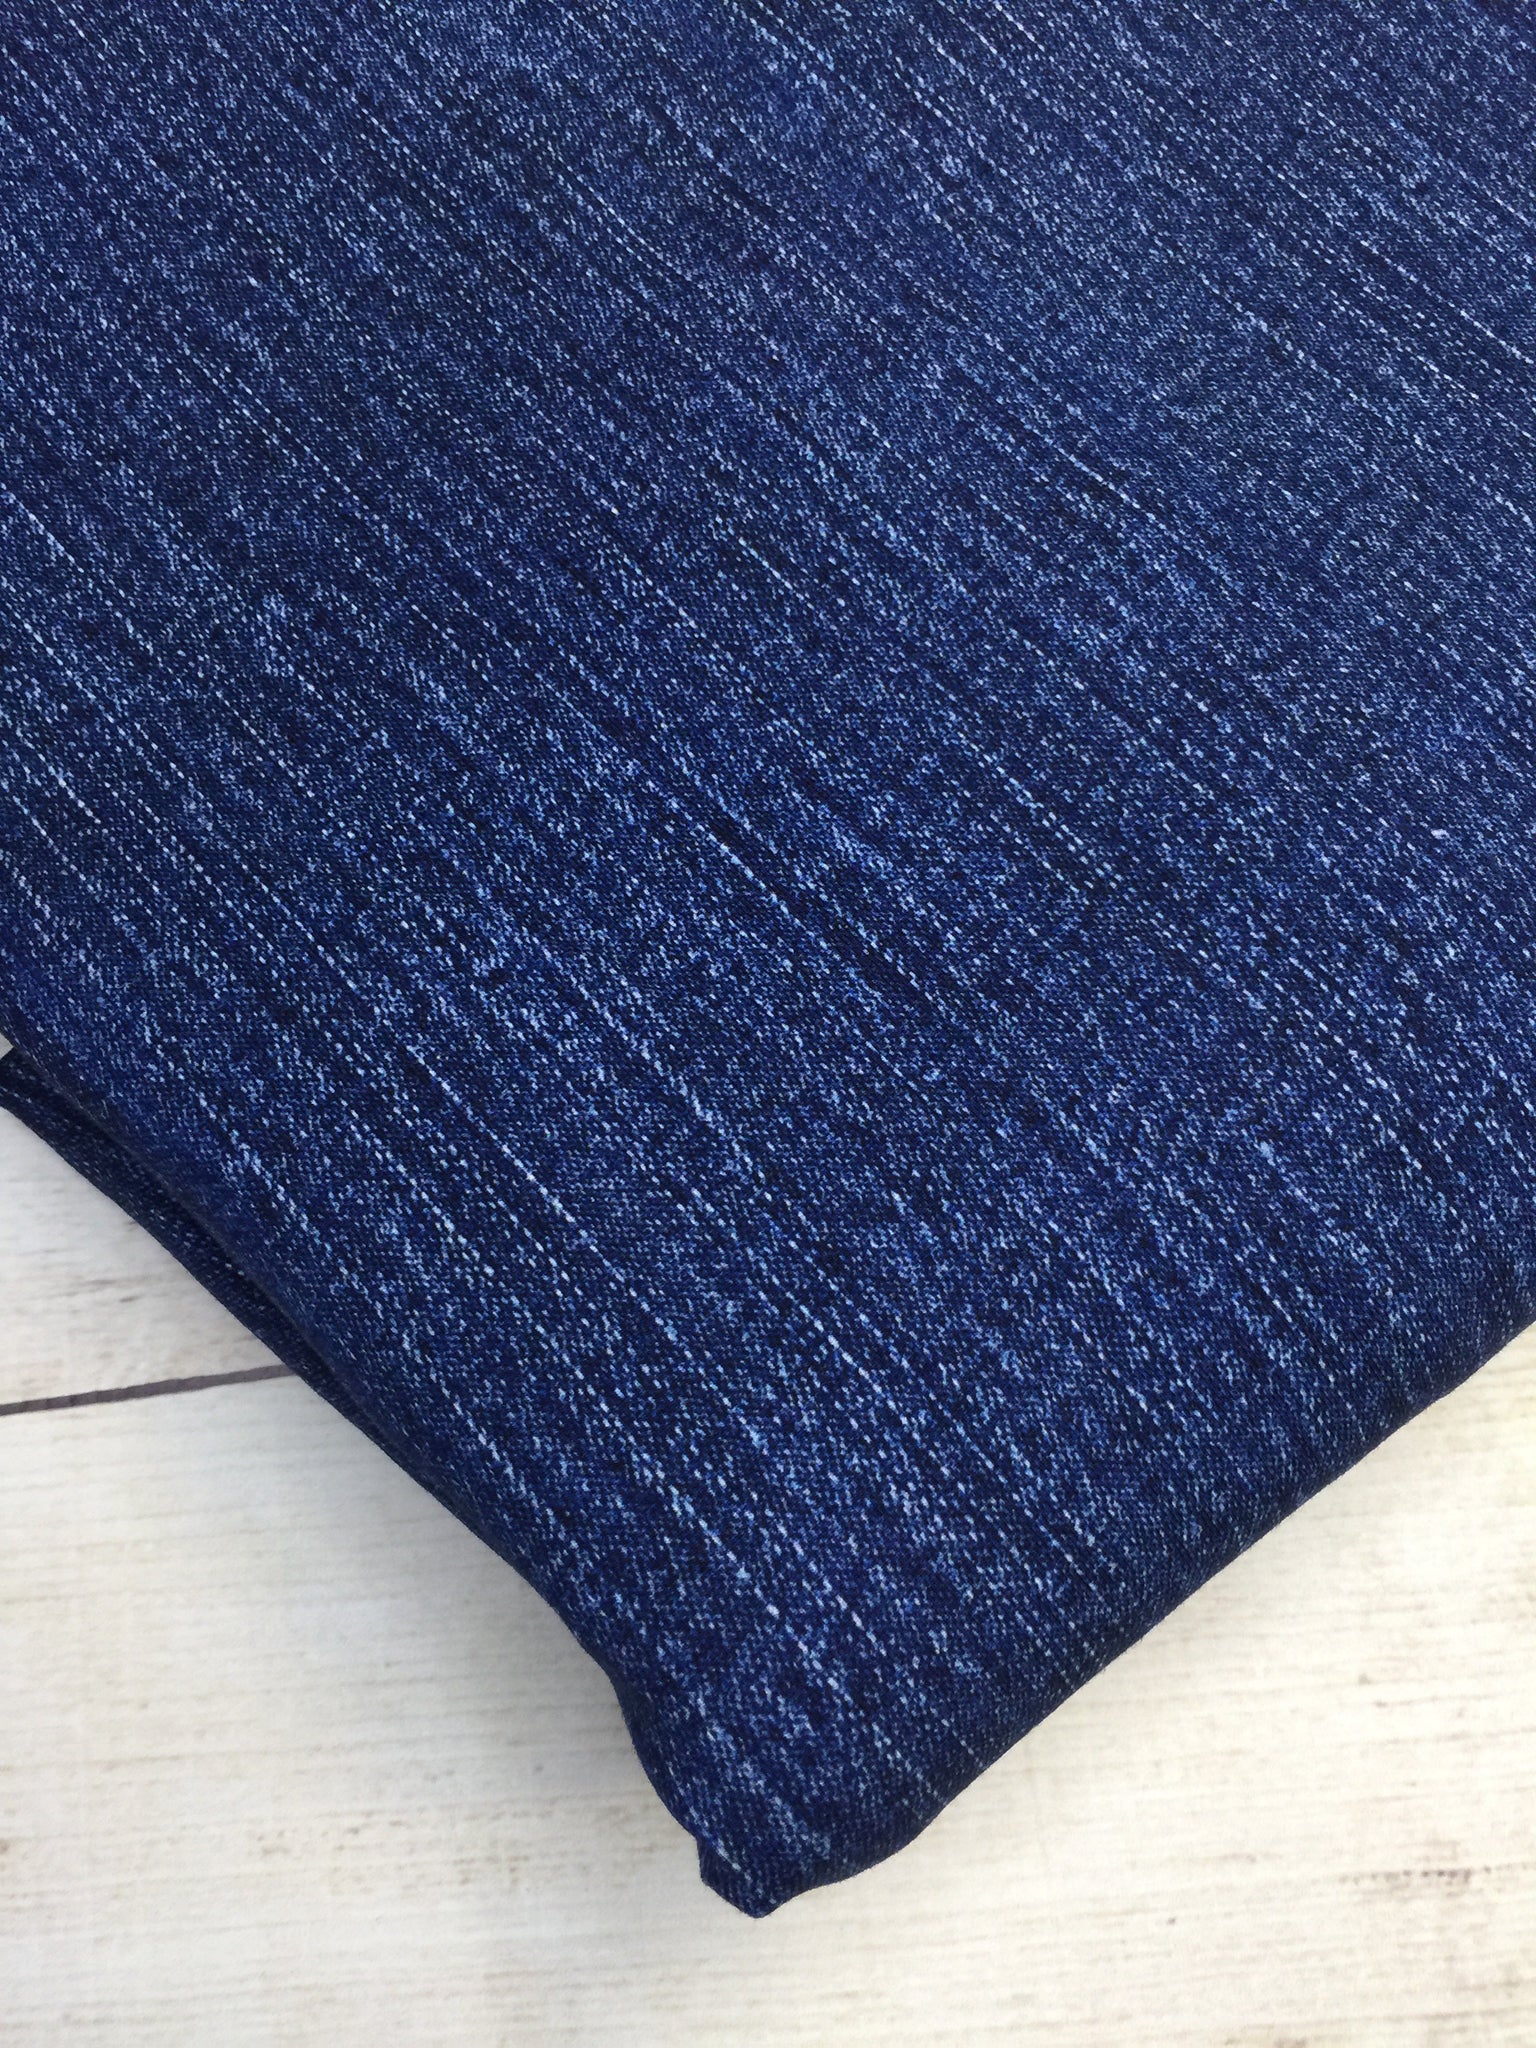 French Terry Fabric - Distributed Wholesale By Hantex Ltd UK and EU